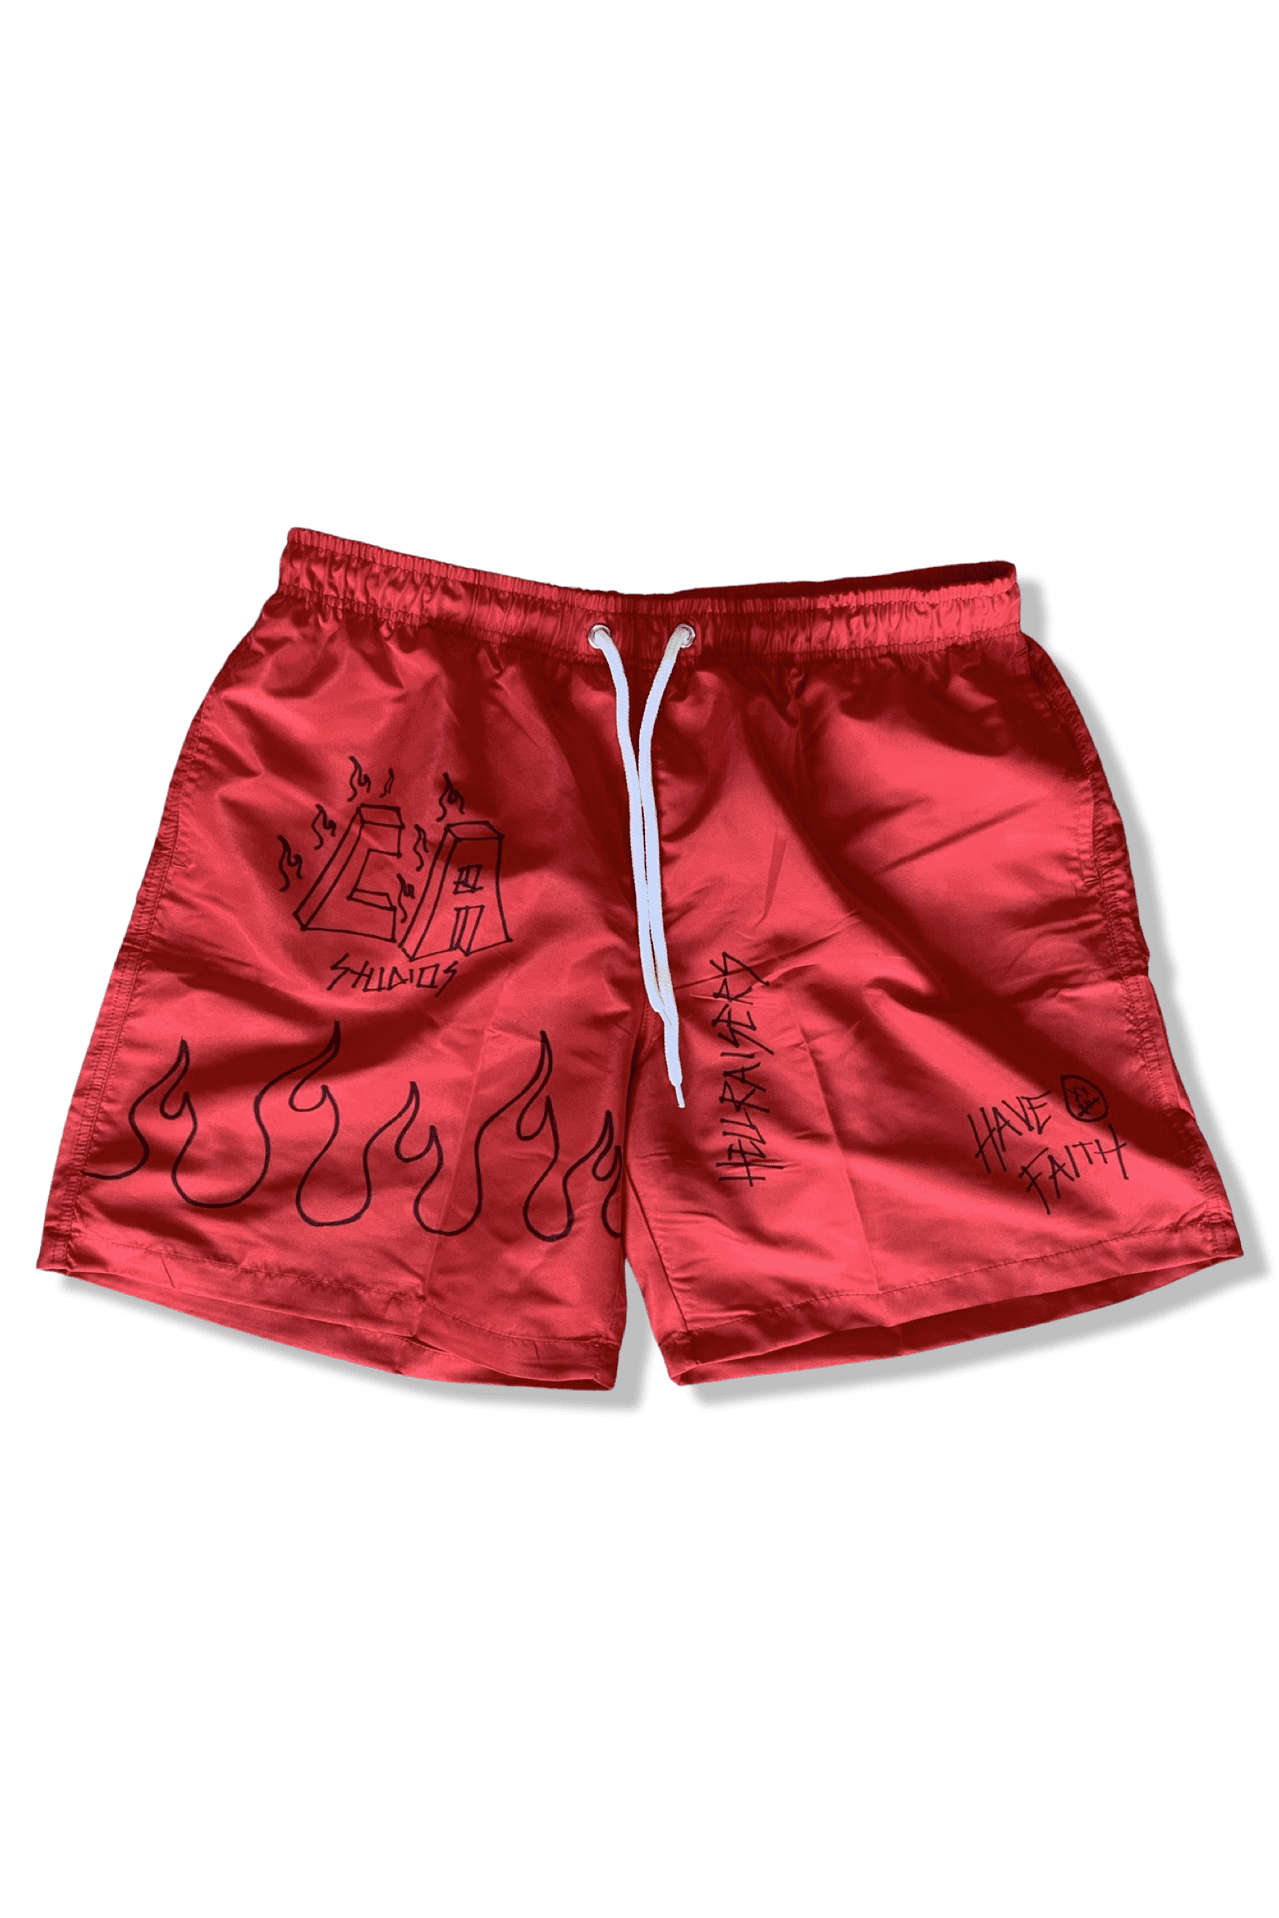 Graphic Shorts - Red